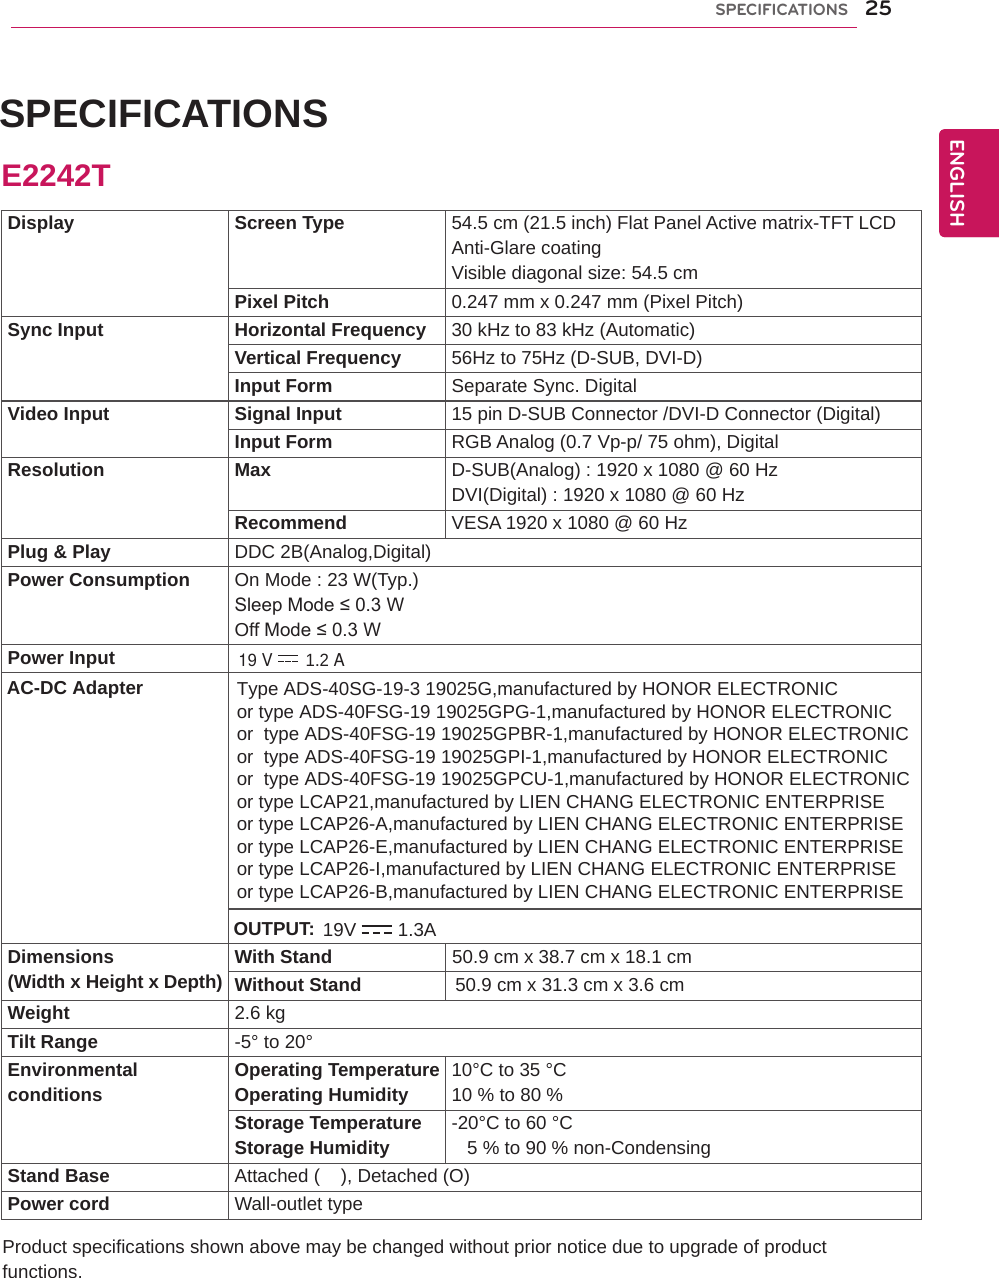 25ENGENGLISHSPECIFICATIONS SPECIFICATIONS Product specifications shown above may be changed without prior notice due to upgrade of product functions.Display Screen Type 54.5 cm (21.5 inch) Flat Panel Active matrix-TFT LCDAnti-Glare coatingVisible diagonal size: 54.5 cmPixel Pitch 0.247 mm x 0.247 mm (Pixel Pitch)Sync Input Horizontal Frequency 30 kHz to 83 kHz (Automatic)Vertical Frequency 56Hz to 75Hz (D-SUB, DVI-D)Input Form Separate Sync. DigitalVideo Input Signal Input 15 pin D-SUB Connector /DVI-D Connector (Digital)Input Form RGB Analog (0.7 Vp-p/ 75 ohm), DigitalResolution Max D-SUB(Analog) : 1920 x 1080 @ 60 HzDVI(Digital) : 1920 x 1080 @ 60 HzRecommend VESA 1920 x 1080 @ 60 HzPlug &amp; Play DDC 2B(Analog,Digital)Power Consumption On Mode : 23 W(Typ.)Sleep Mode ≤ 0.3 W Off Mode ≤ 0.3 W Power InputDimensions(Width x Height x Depth) With Stand                       50.9 cm x 38.7 cm x 18.1 cmWithout Stand                  50.9 cm x 31.3 cm x 3.6 cmWeight 2.6 kgTilt Range -5° to 20°Environmentalconditions Operating TemperatureOperating Humidity 10°C to 35 °C10 % to 80 % Storage TemperatureStorage Humidity -20°C to 60 °C   5 % to 90 % non-CondensingStand Base Attached (    ), Detached (O)Power cord Wall-outlet typeE2242T19 V 1.2 A AC-DC Adapter Type ADS-40SG-19-3 19025G,manufactured by HONOR ELECTRONICor type ADS-40FSG-19 19025GPG-1,manufactured by HONOR ELECTRONICor  type ADS-40FSG-19 19025GPBR-1,manufactured by HONOR ELECTRONICor  type ADS-40FSG-19 19025GPI-1,manufactured by HONOR ELECTRONICor  type ADS-40FSG-19 19025GPCU-1,manufactured by HONOR ELECTRONICor type LCAP21,manufactured by LIEN CHANG ELECTRONIC ENTERPRISEor type LCAP26-A,manufactured by LIEN CHANG ELECTRONIC ENTERPRISEor type LCAP26-E,manufactured by LIEN CHANG ELECTRONIC ENTERPRISEor type LCAP26-I,manufactured by LIEN CHANG ELECTRONIC ENTERPRISEor type LCAP26-B,manufactured by LIEN CHANG ELECTRONIC ENTERPRISE OUTPUT: 19V 1.3A